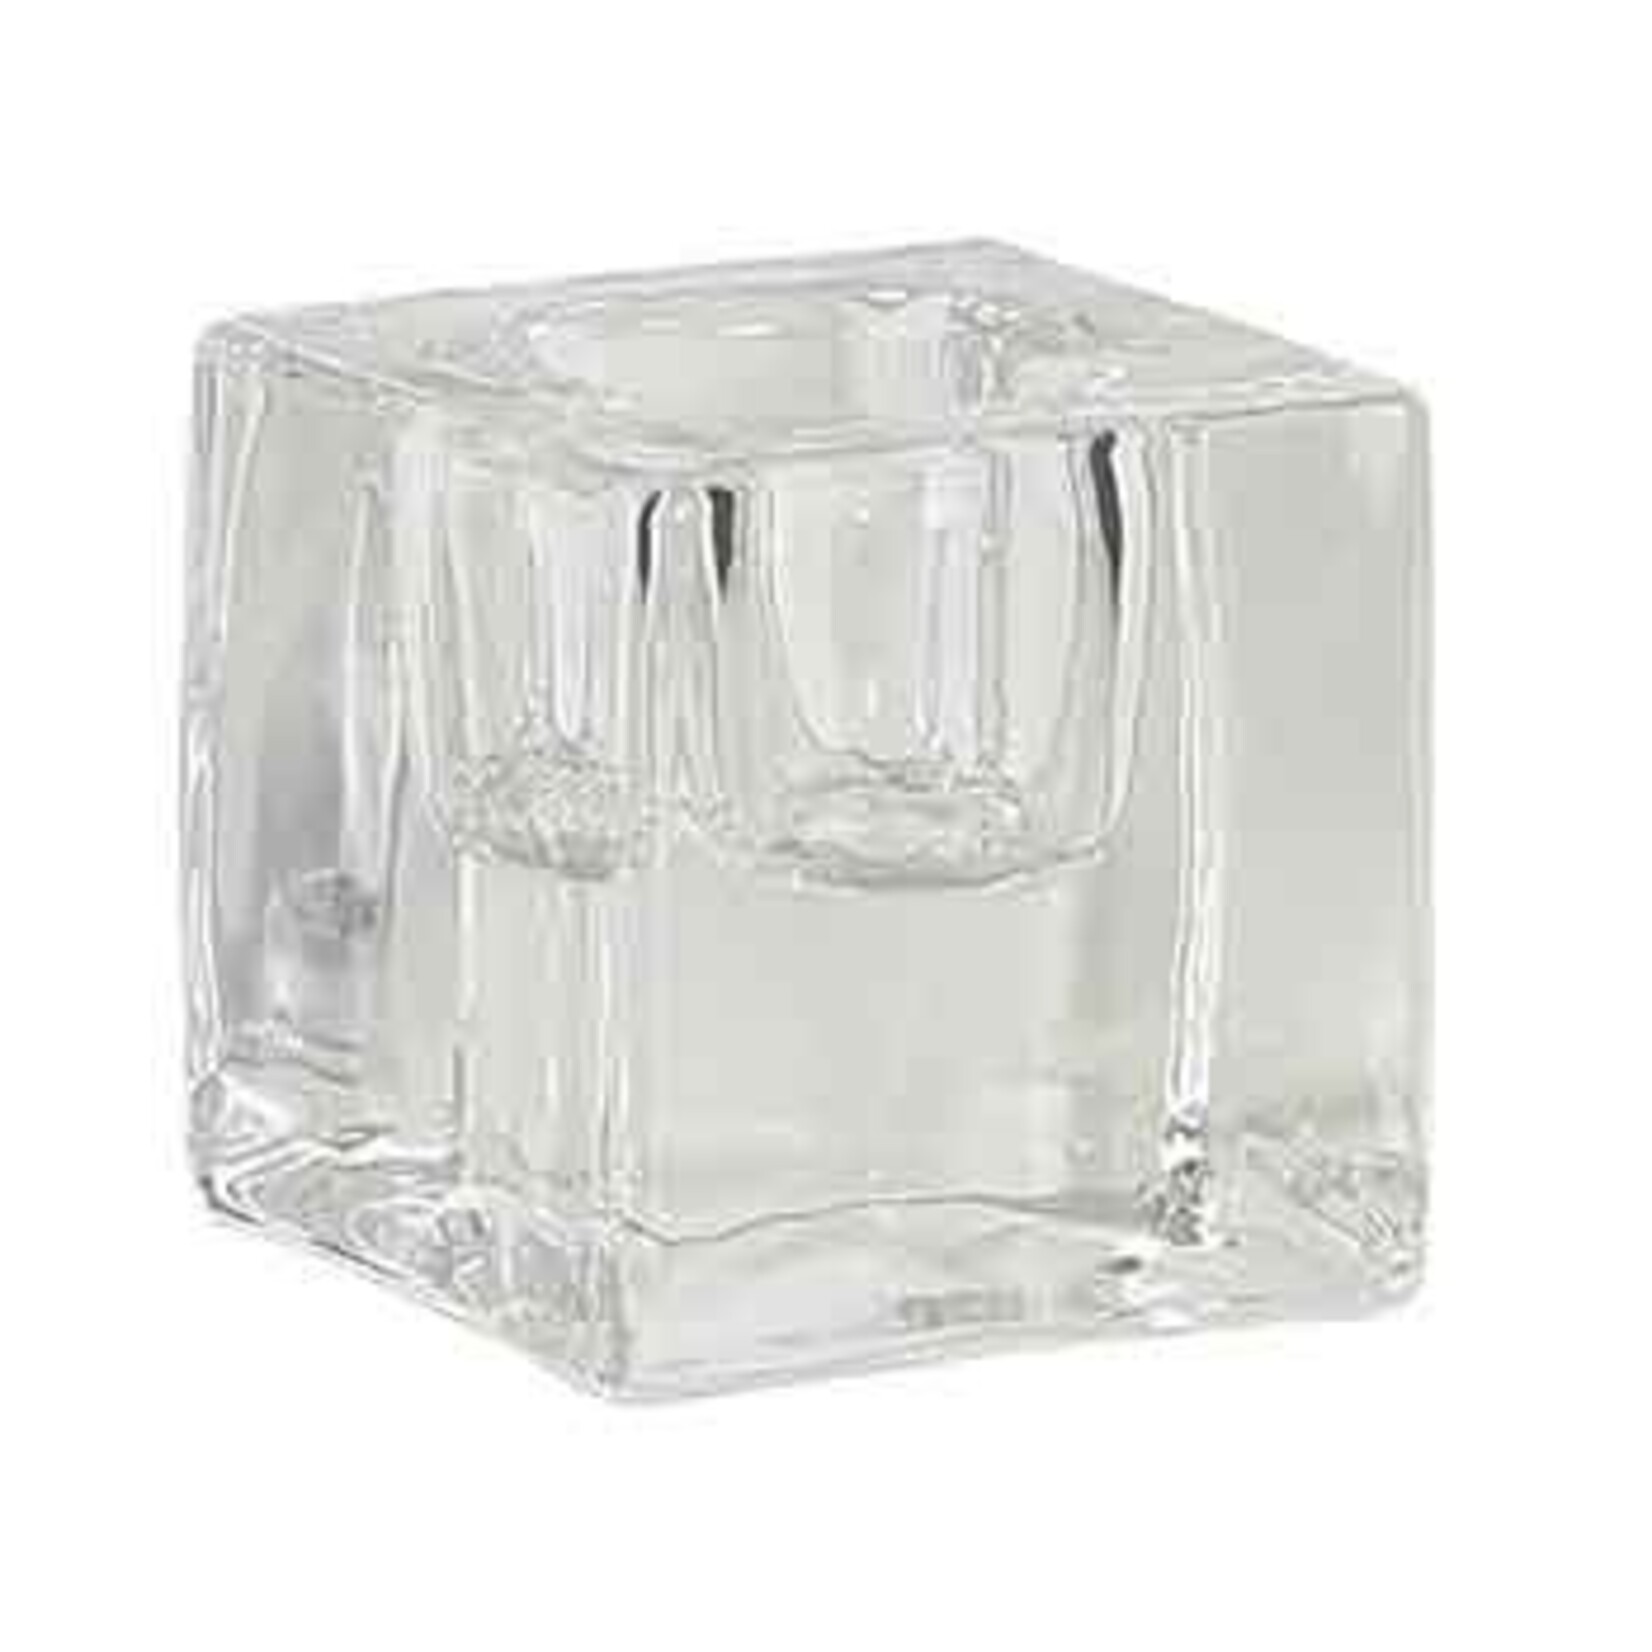 1.55”H X 1” OPEN CLEAR GLASS TAPER CANDLE HOLDER